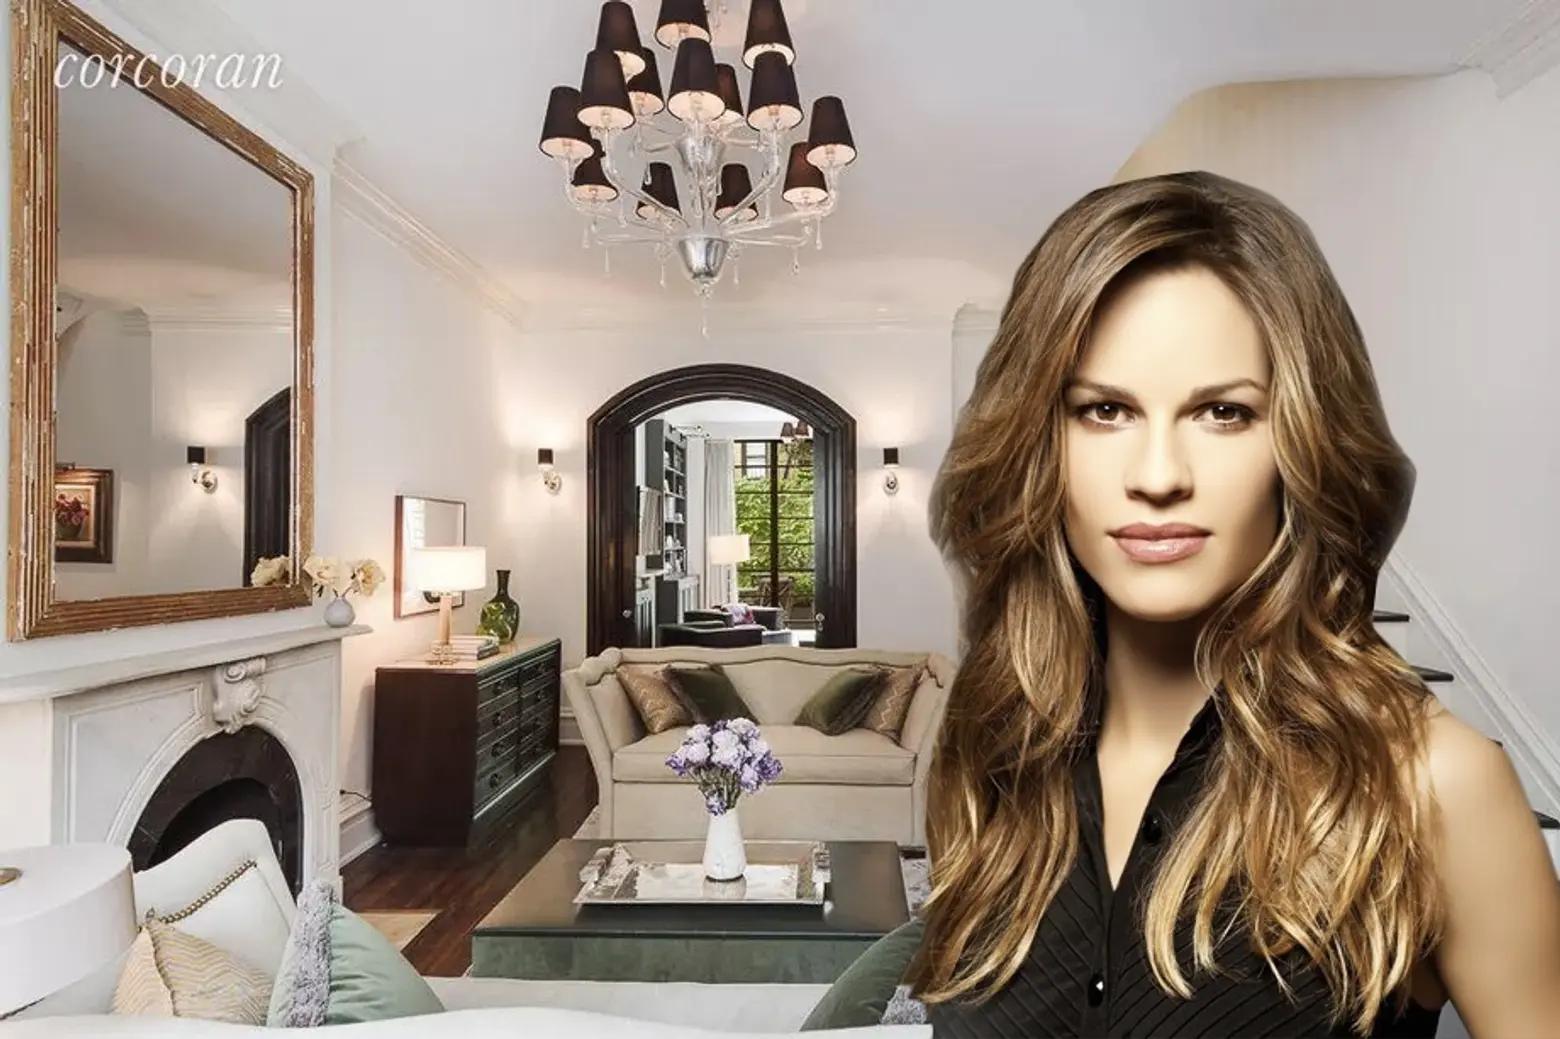 Macy’s executive pays $10.5M for Hilary Swank’s former West Village townhouse